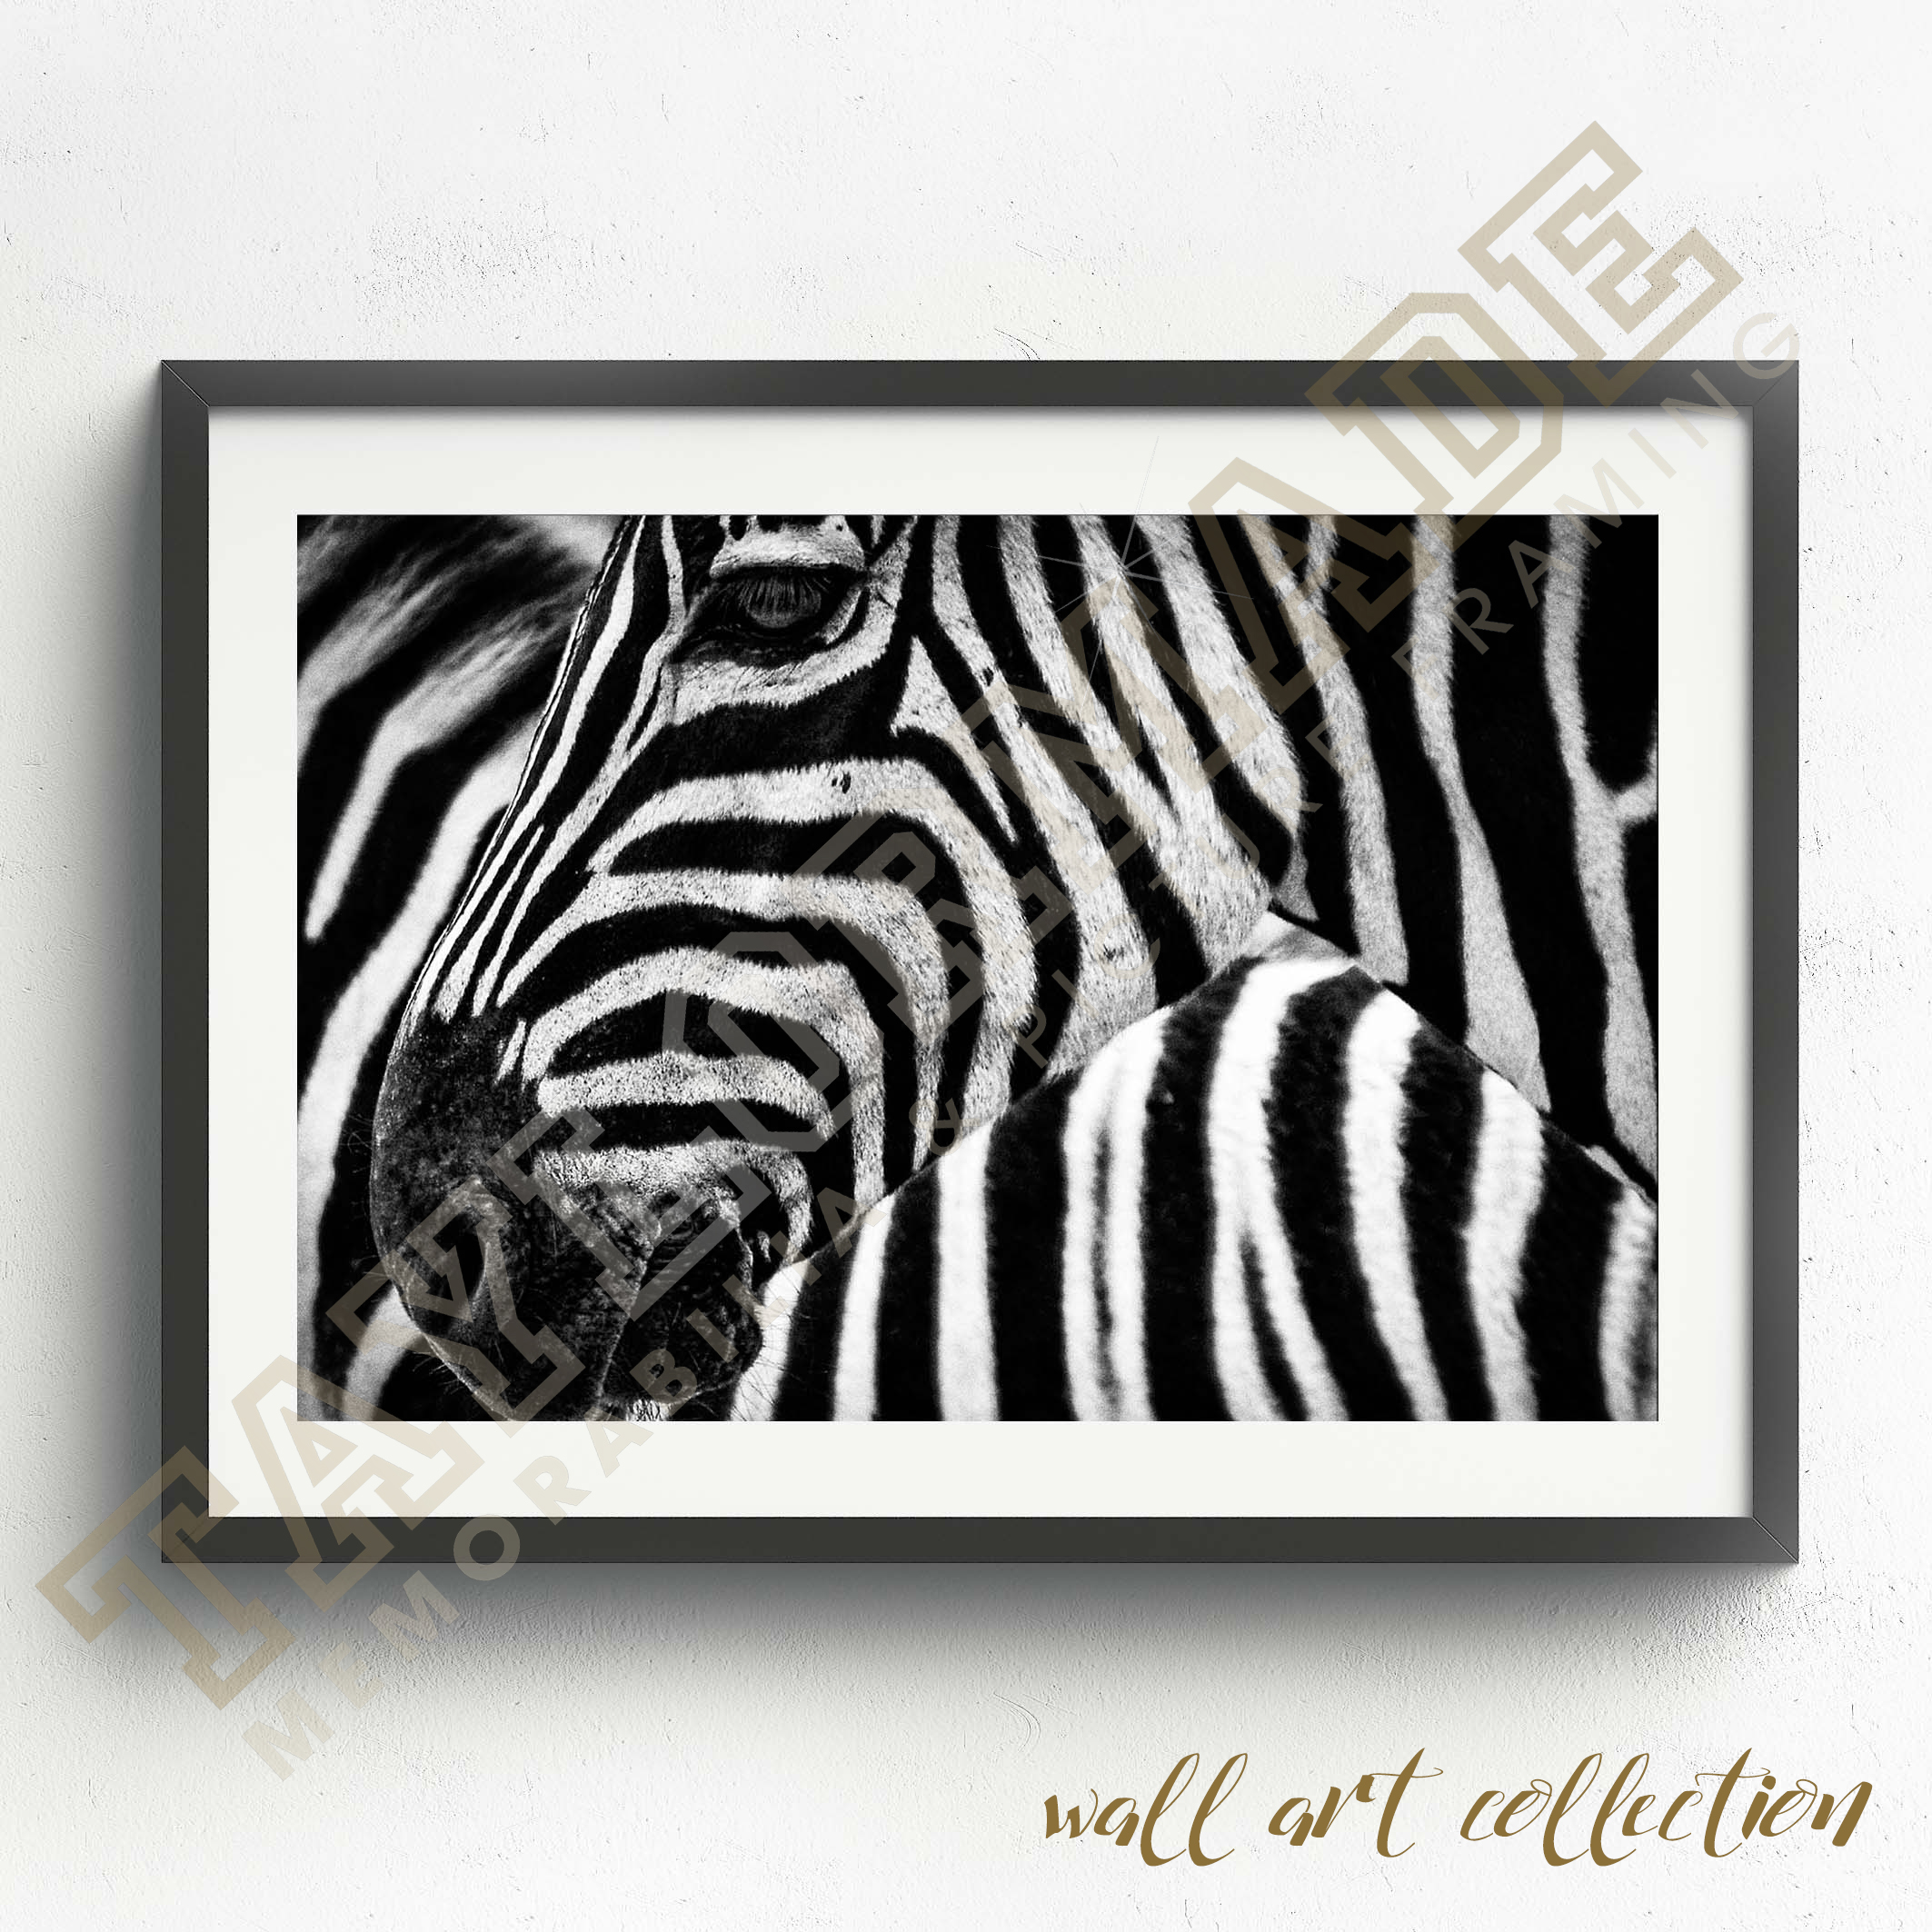 Wall Art Collection – Black Stripes